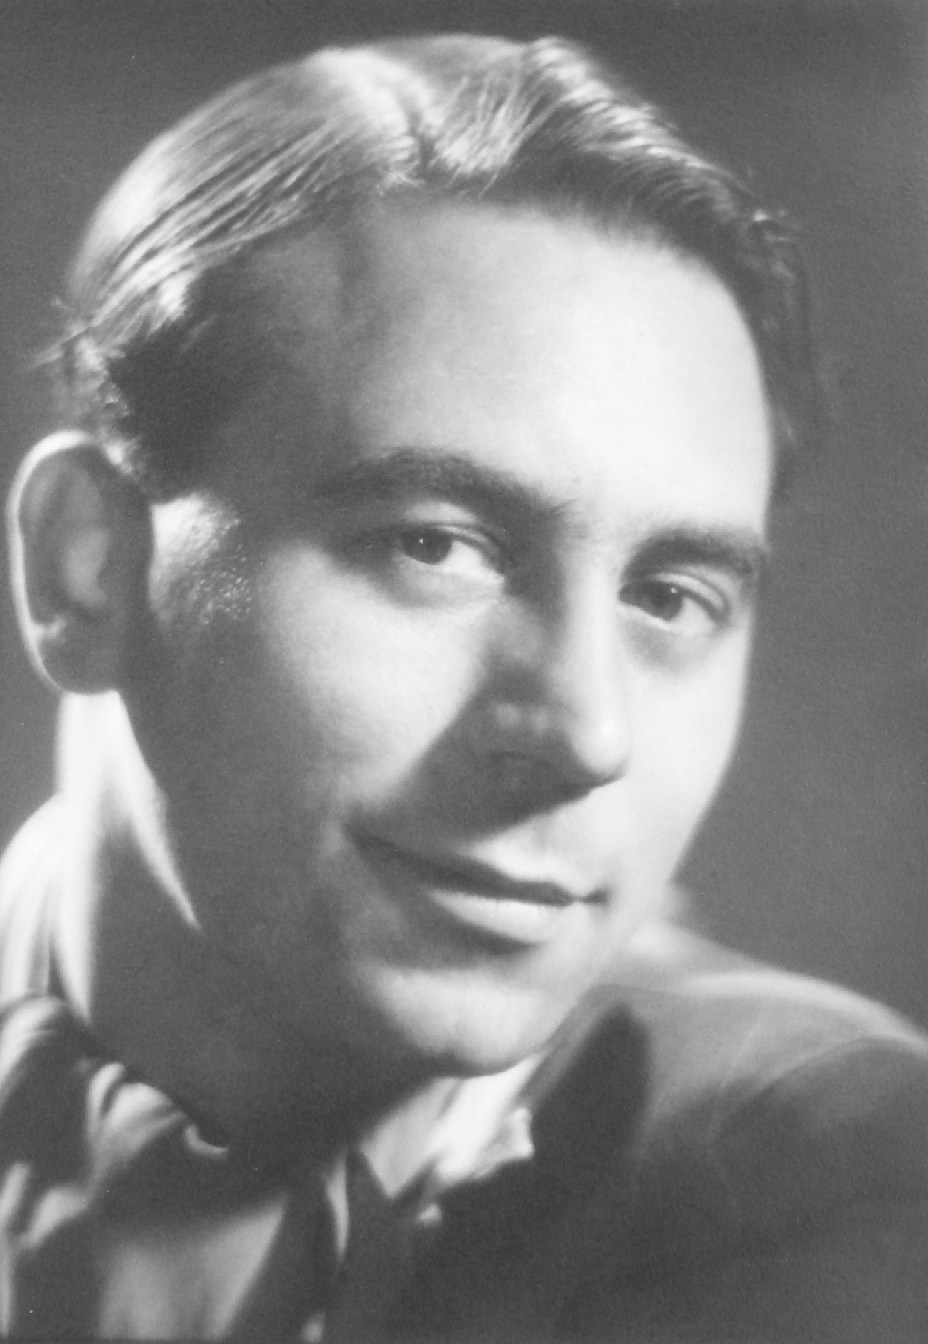 Peter Tranchell in the 1950s